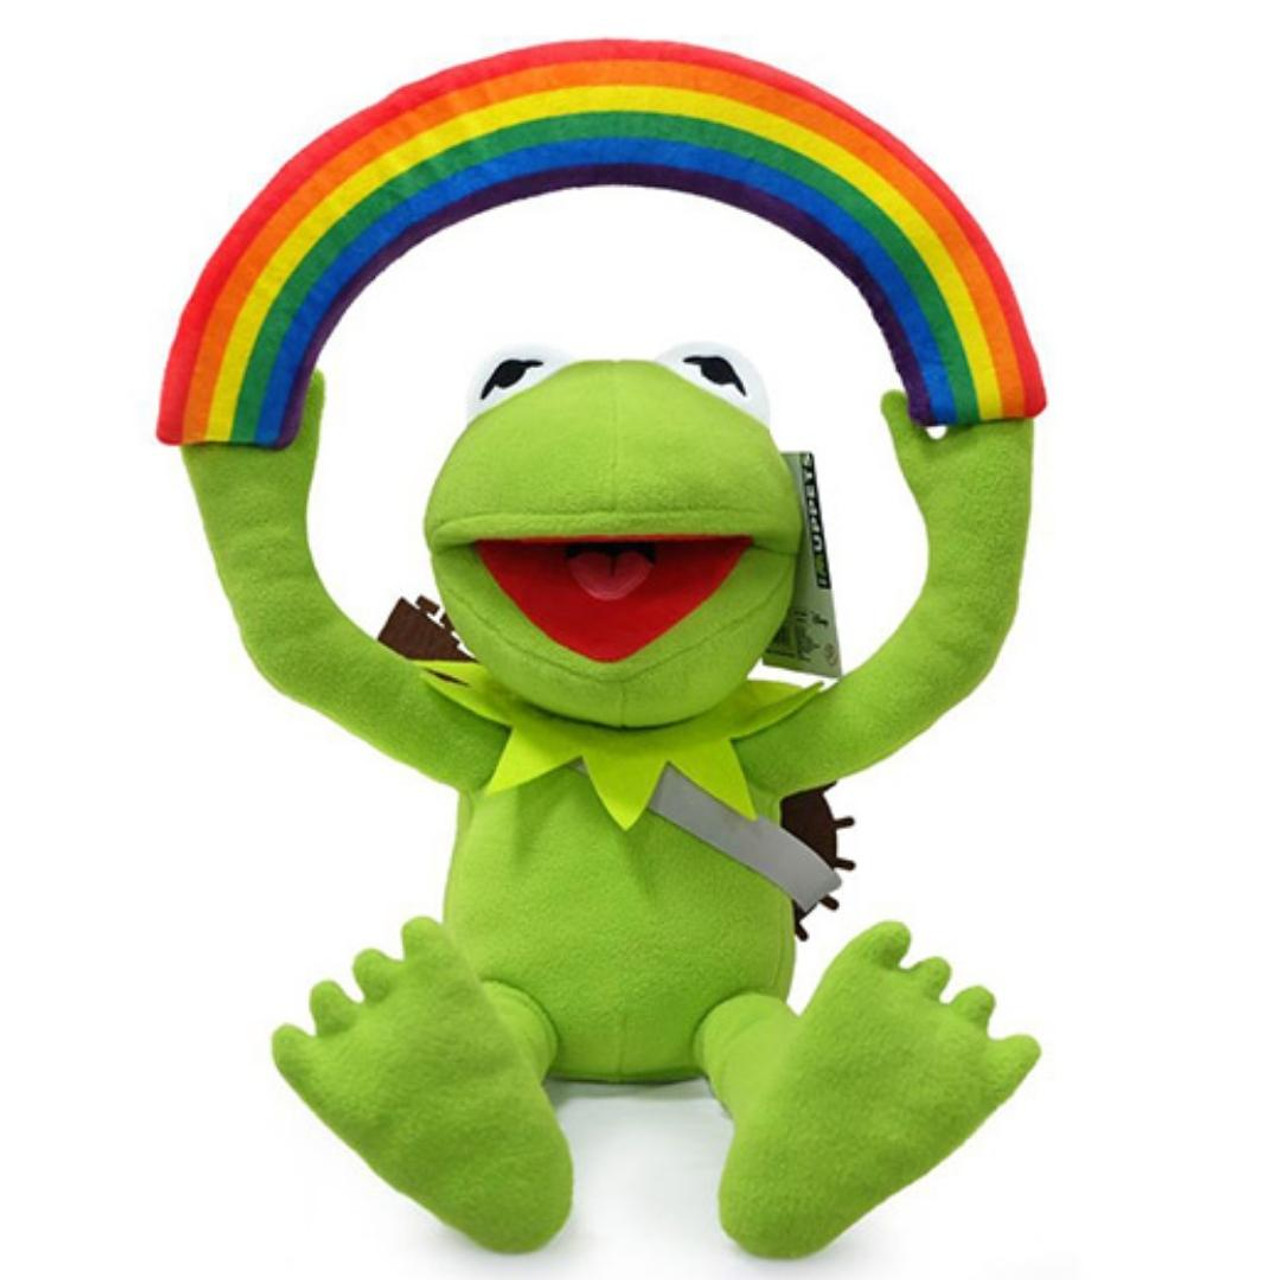 The Muppets Rainbow Connection Kermit 13 Phunny Plush Toy by